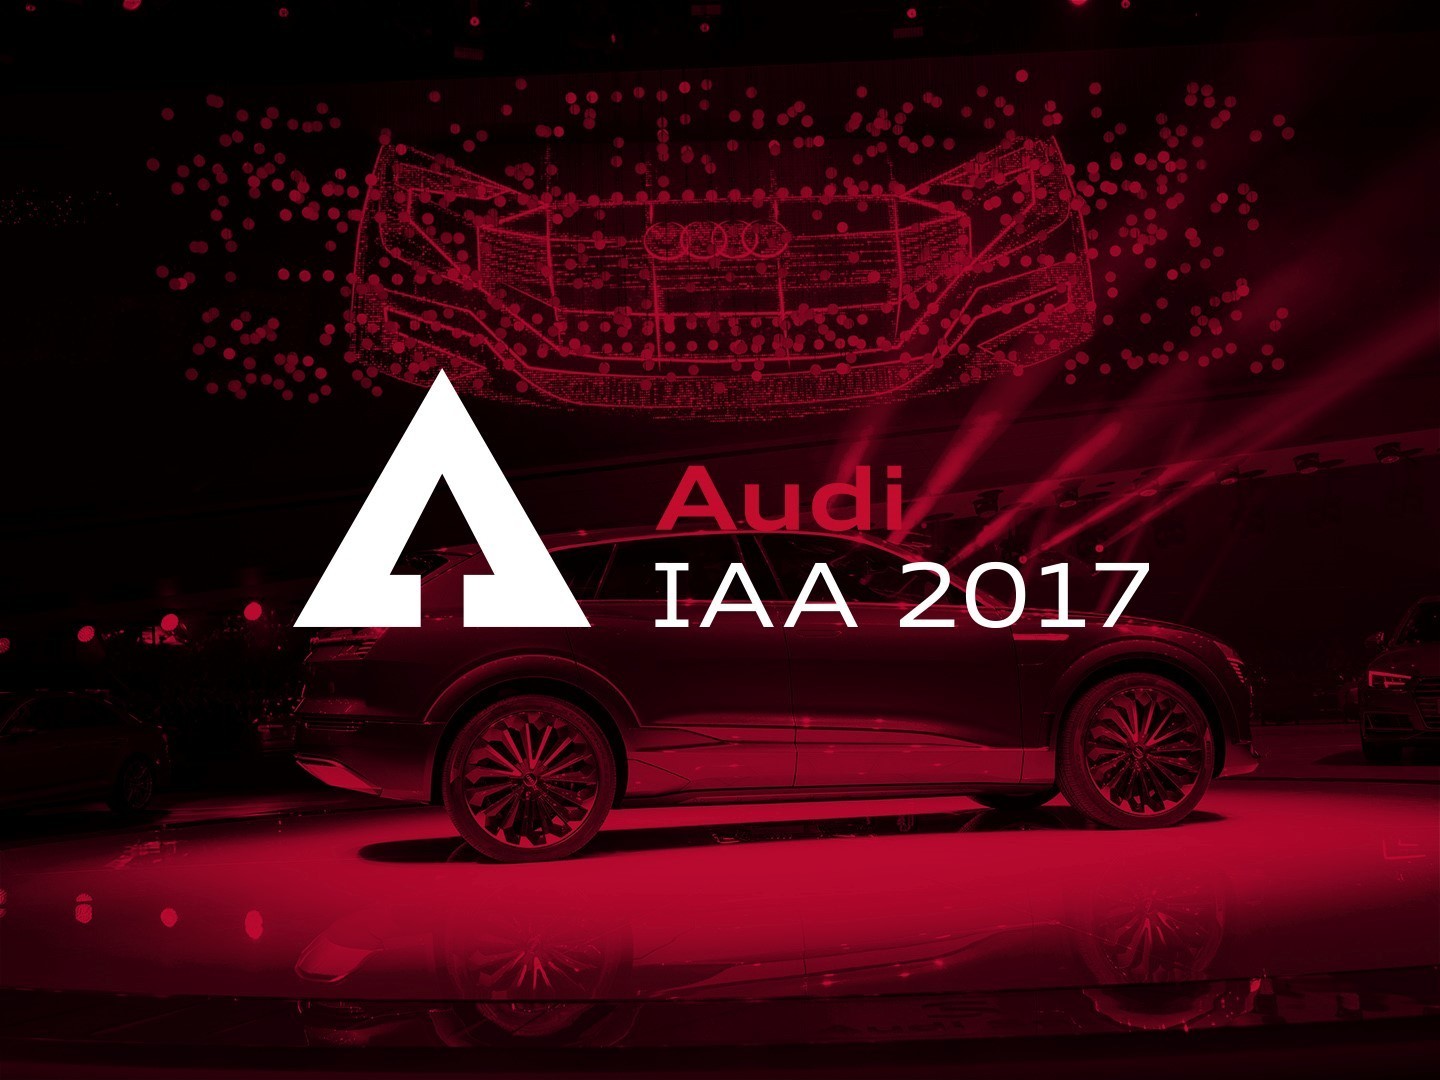 Save the date: Live streaming of the Audi Press Conference at the 2017 IAA